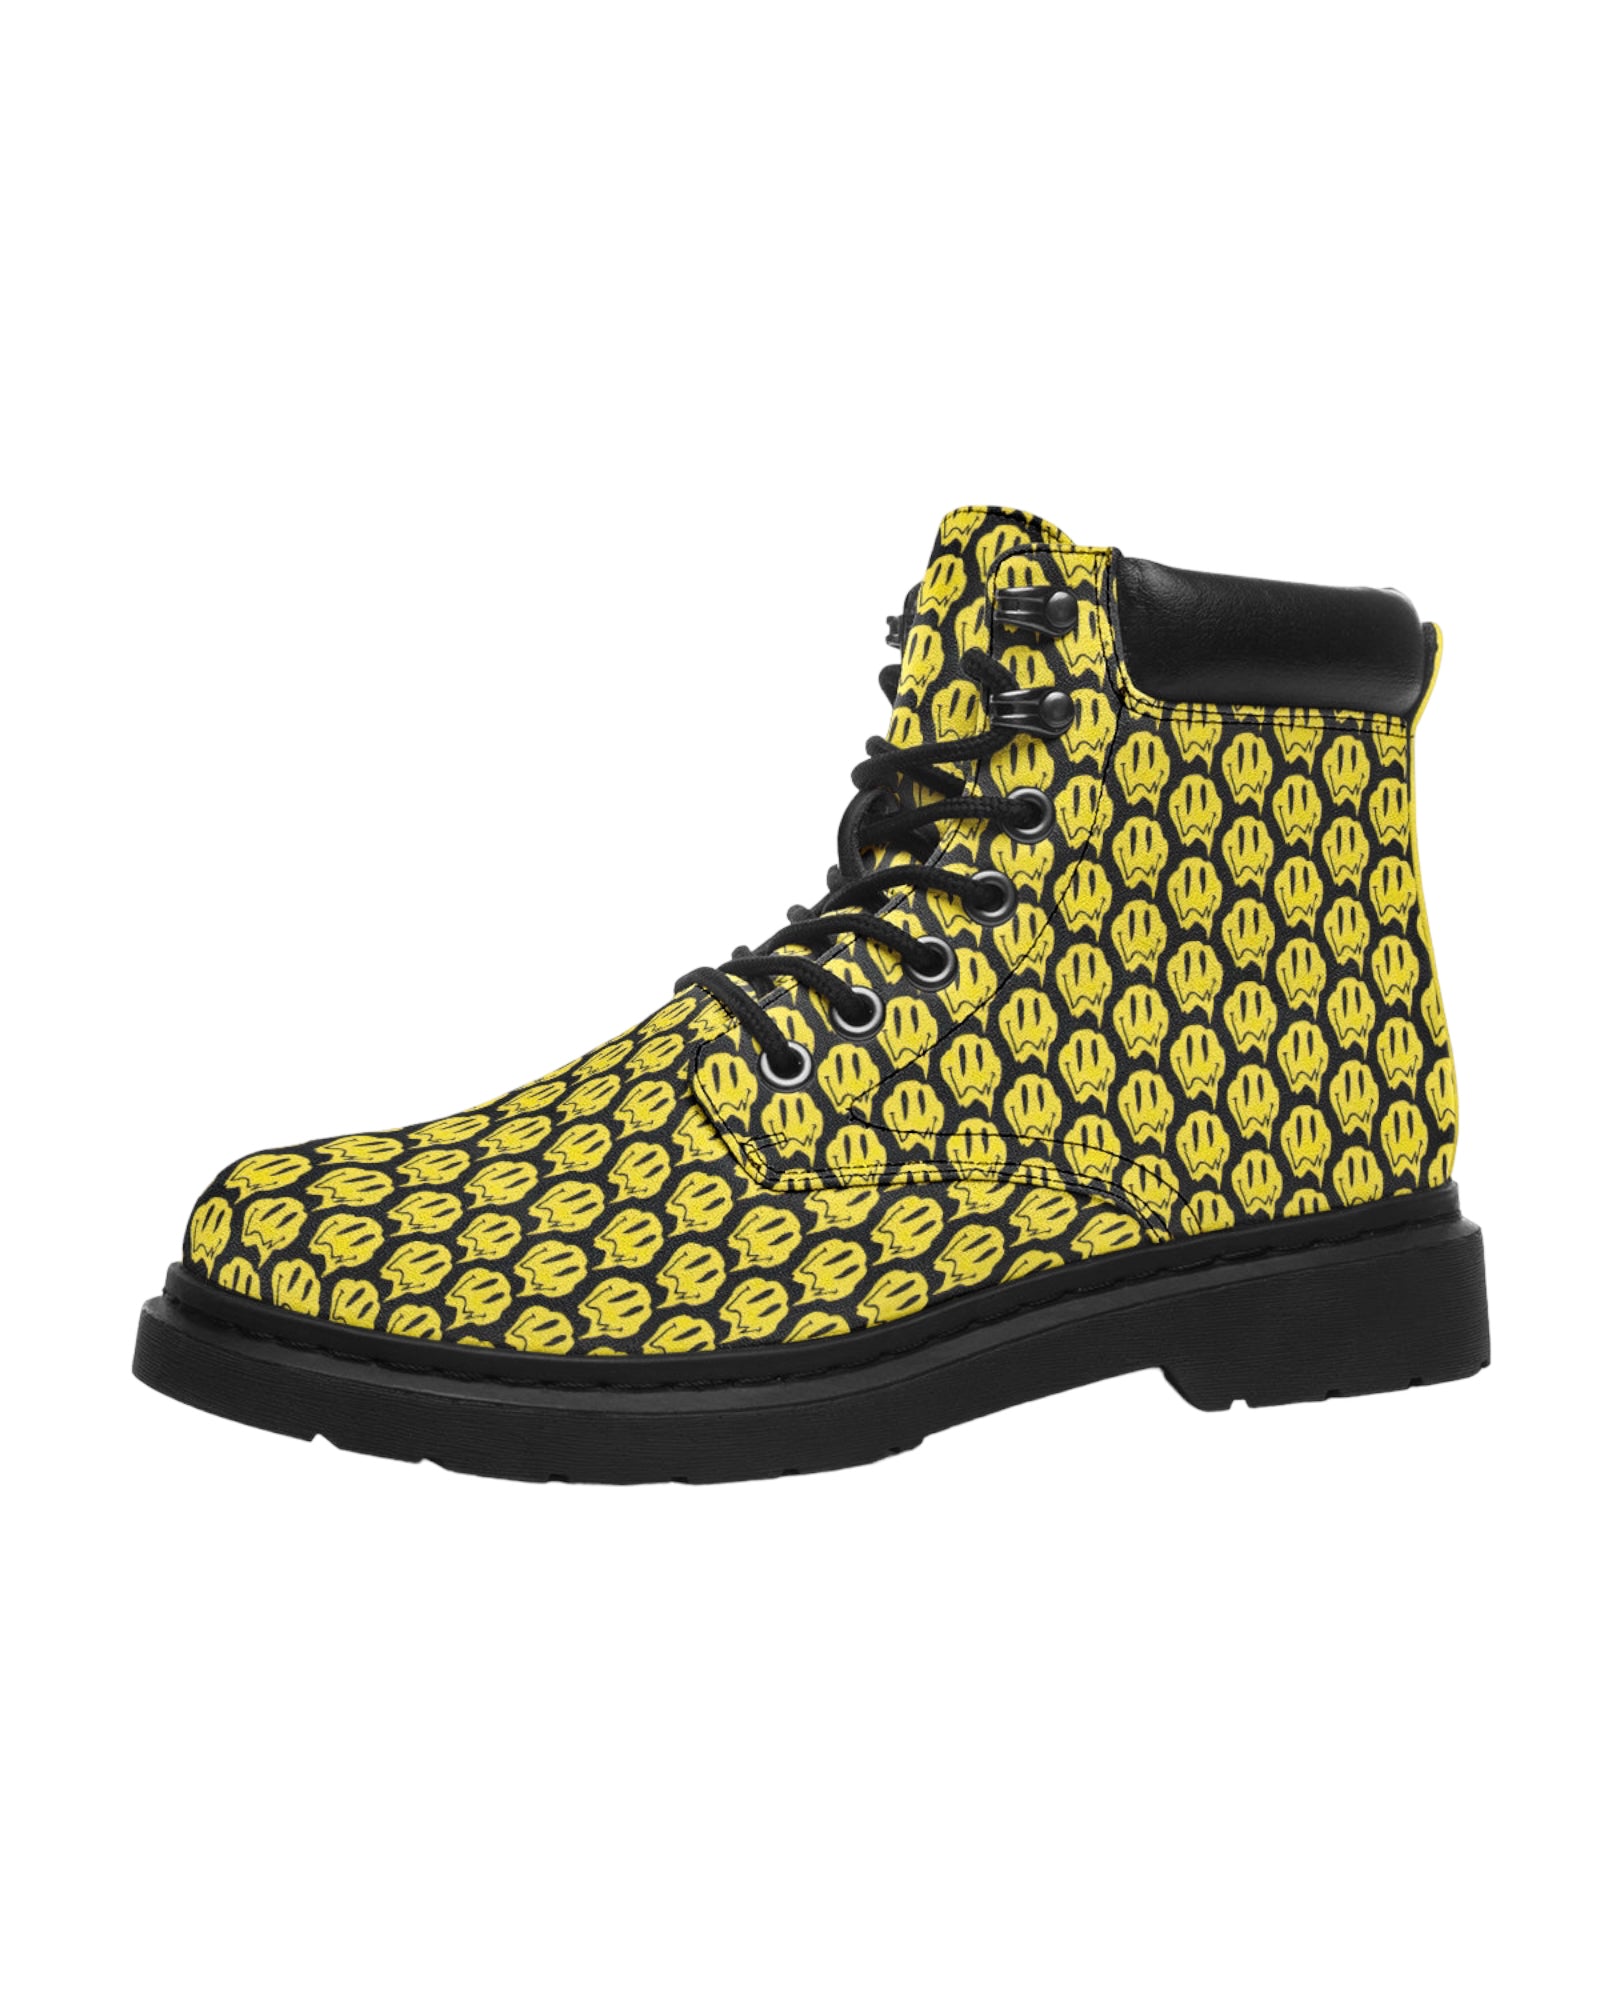 Stay Trippy Festival Boots